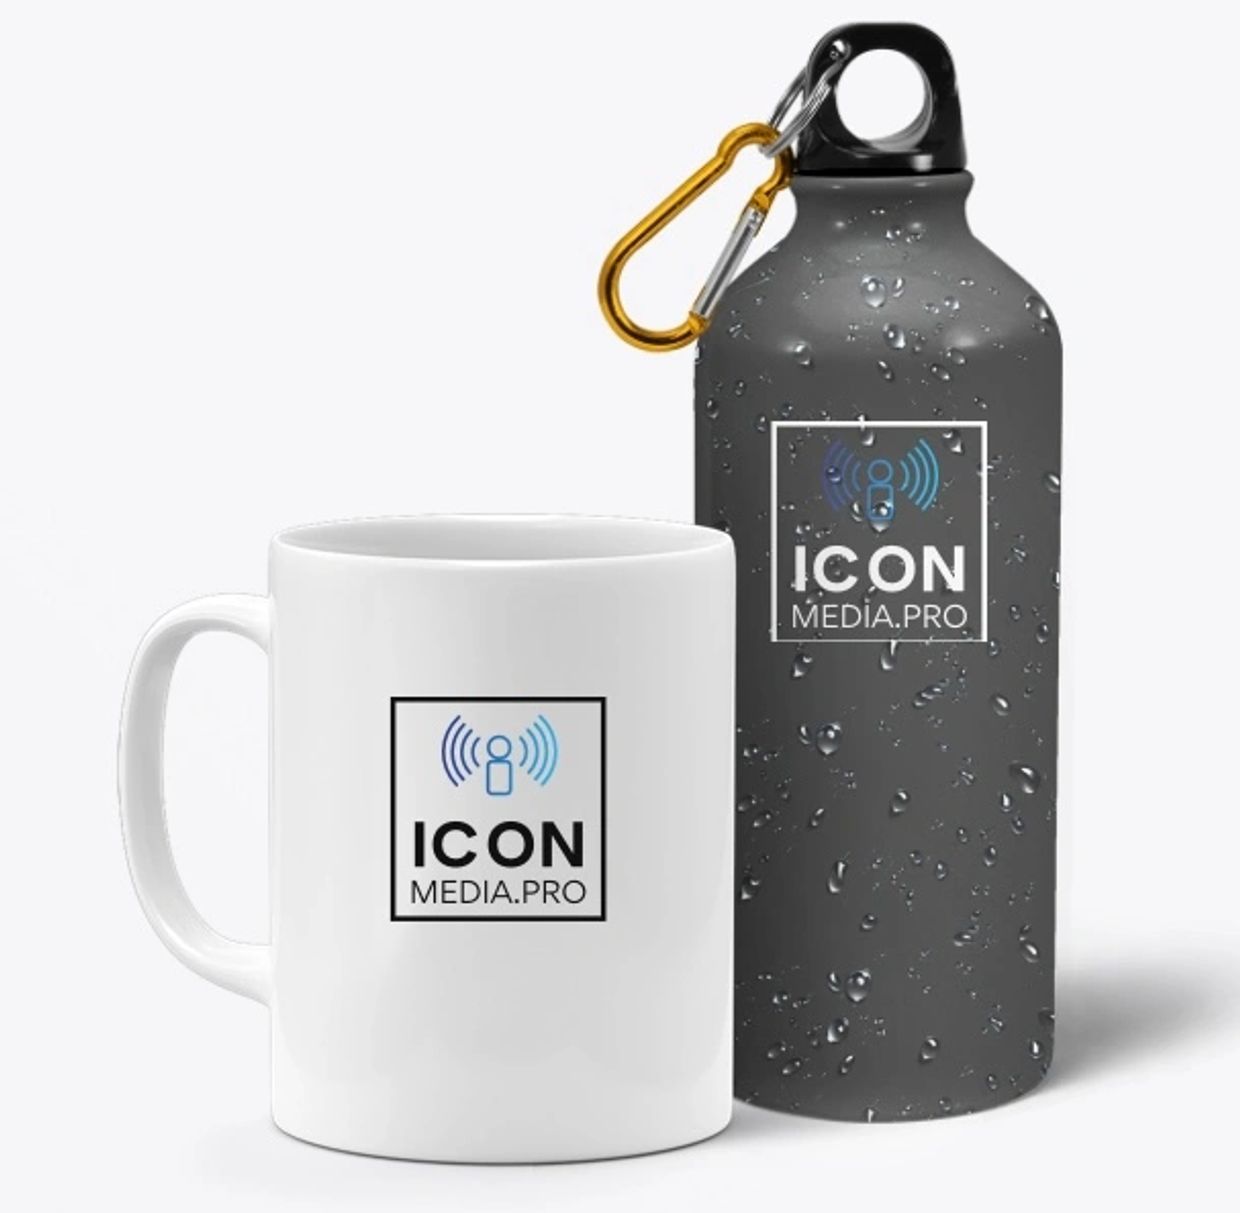 ICON MEDIA PRO produces Business Brand merchandising from concept to design, and online sales.